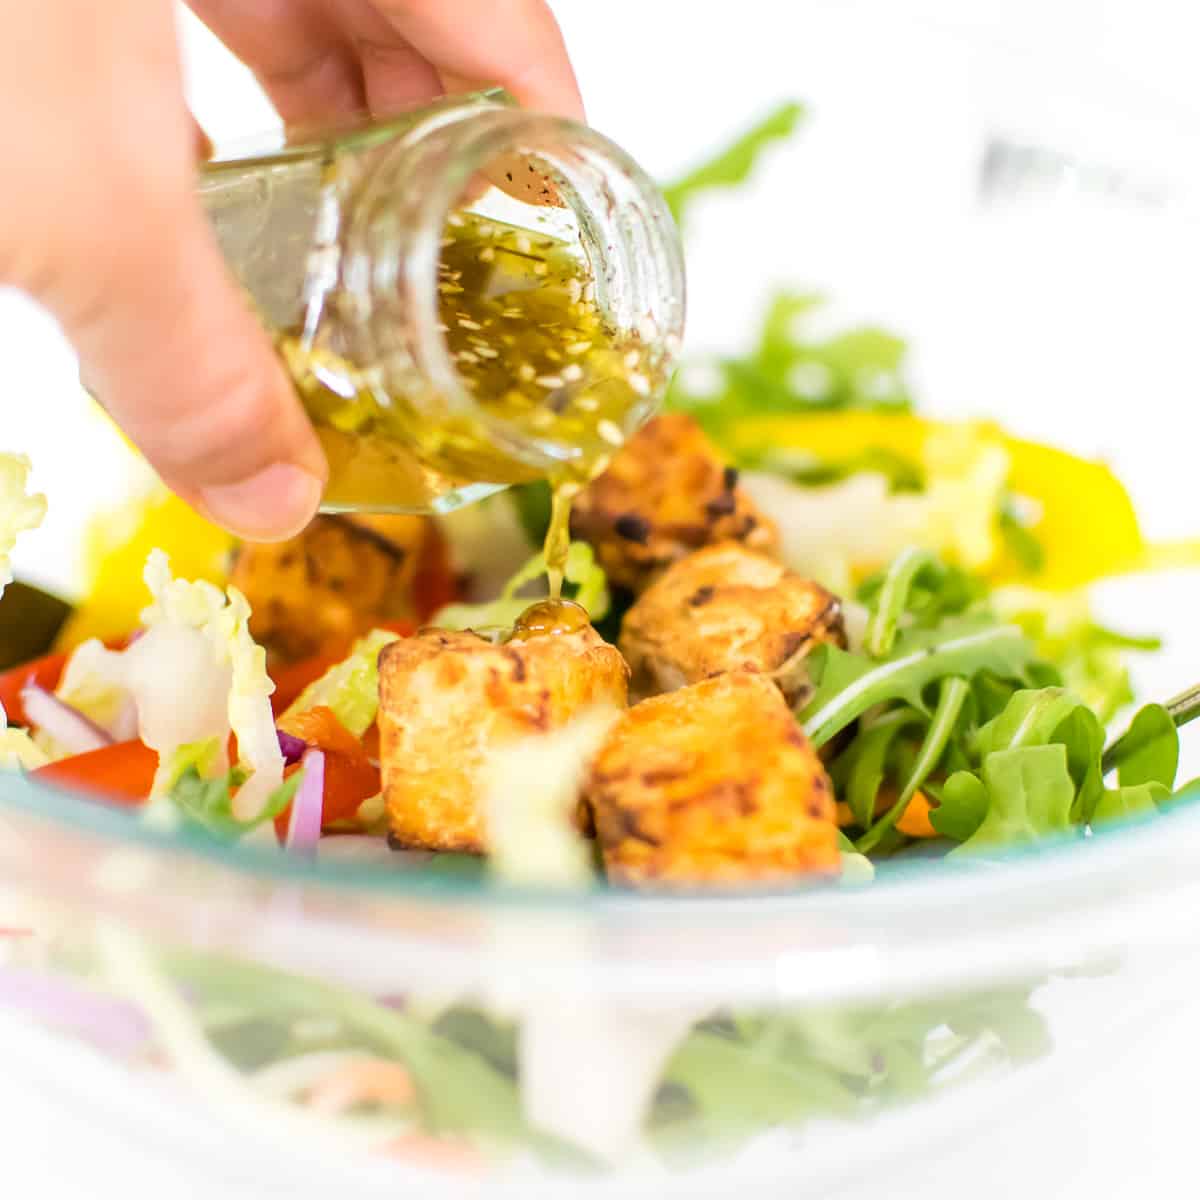 a hand holding the glass jar and drizzling the dressing over the salad. 